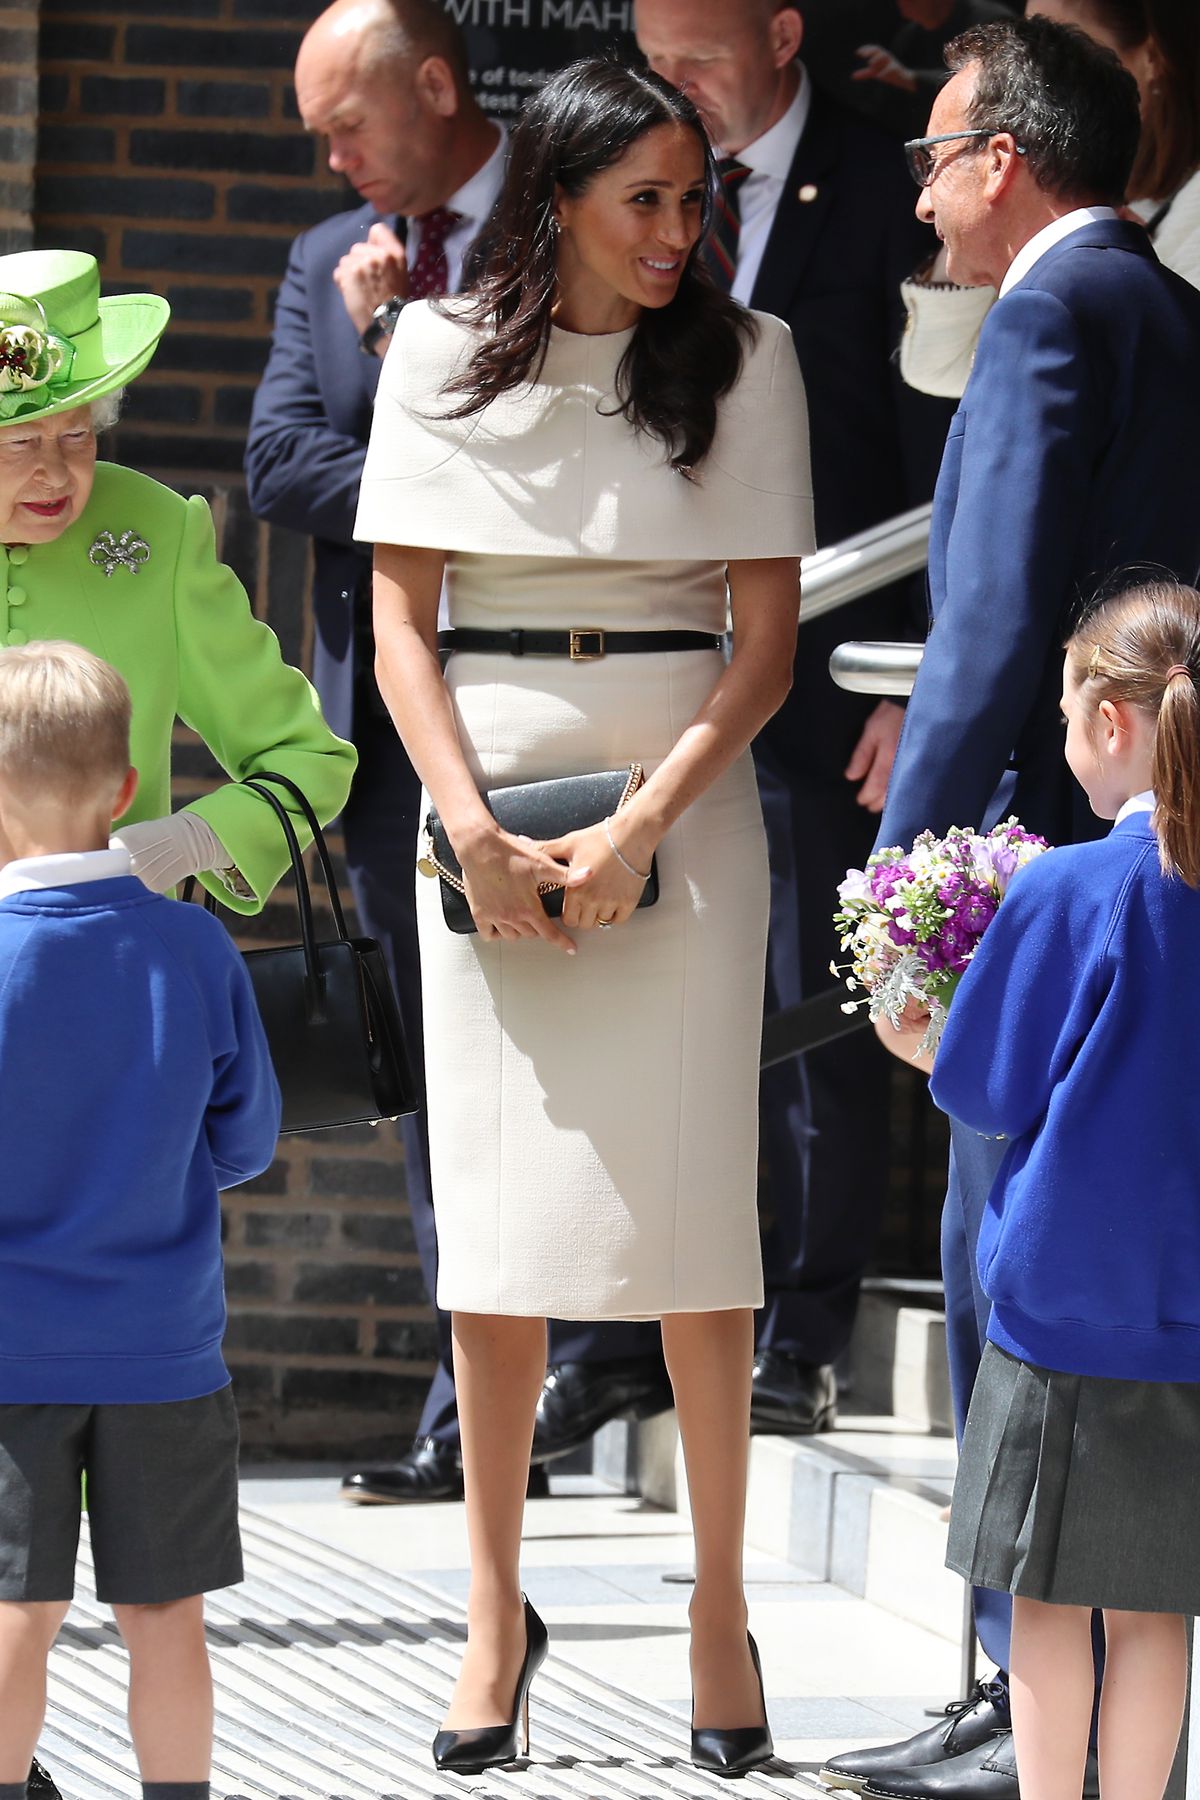 Markle greets people while standing next to the queen.